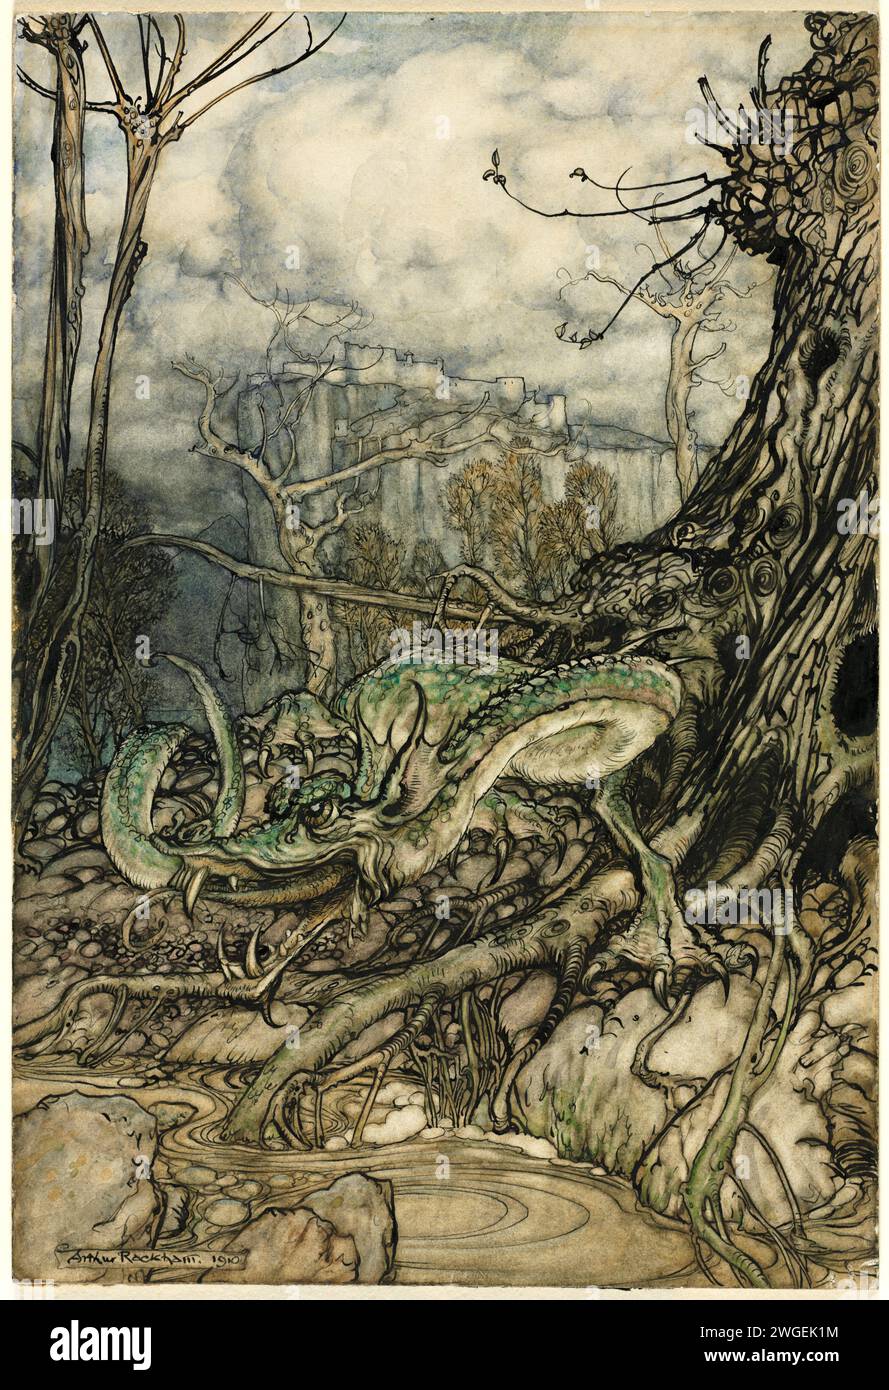 The Green Dragon.  Arthur Rackham.  1910.  Pen and ink with wash Stock Photo